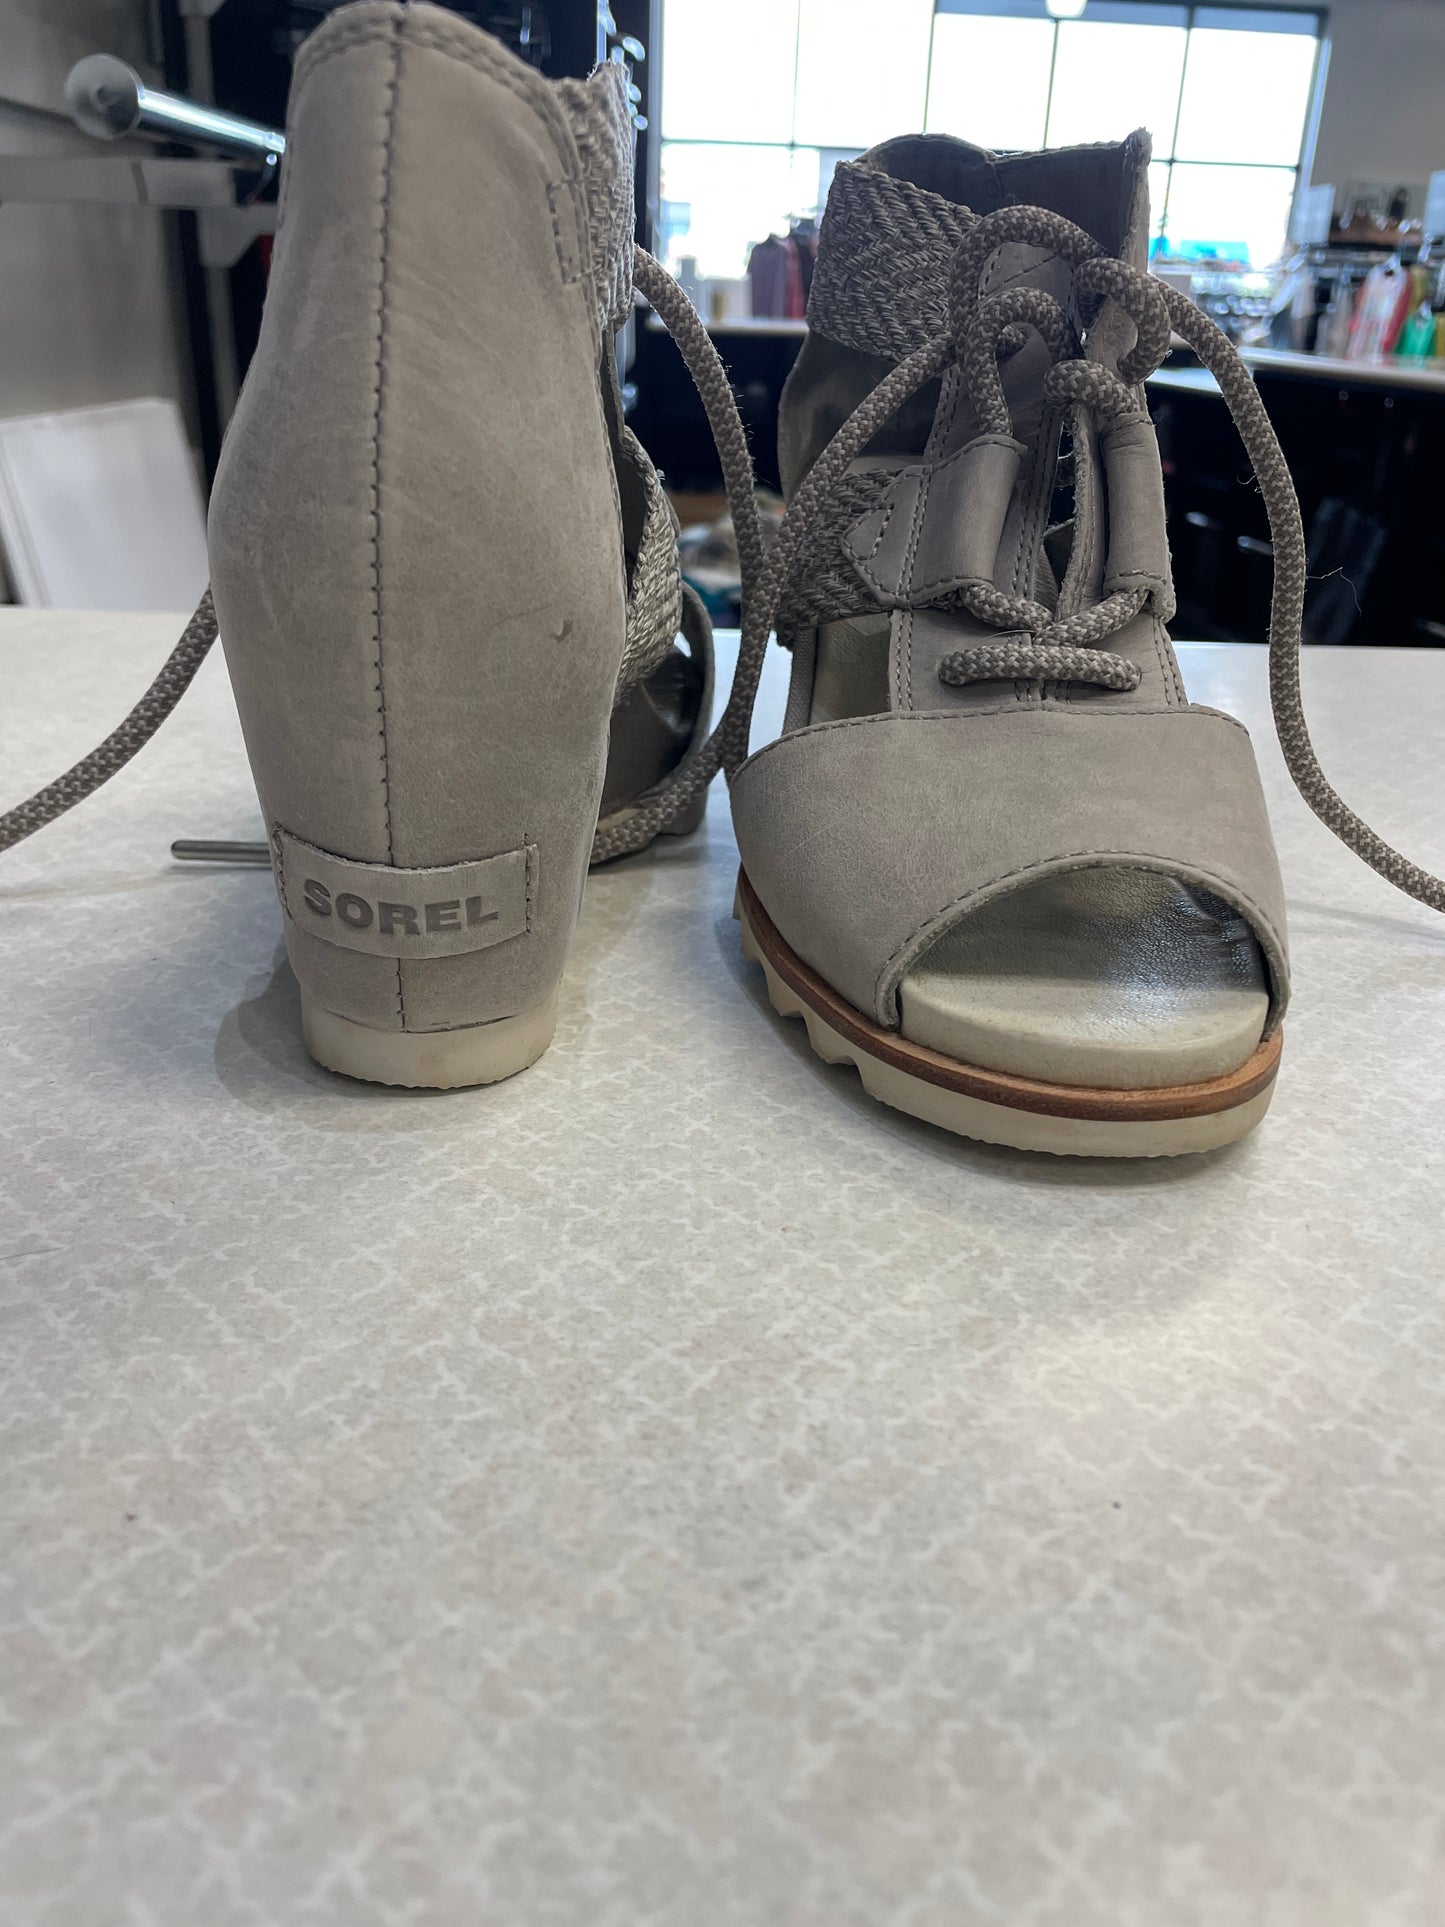 Shoes Heels Wedge By Sorel  Size: 7.5